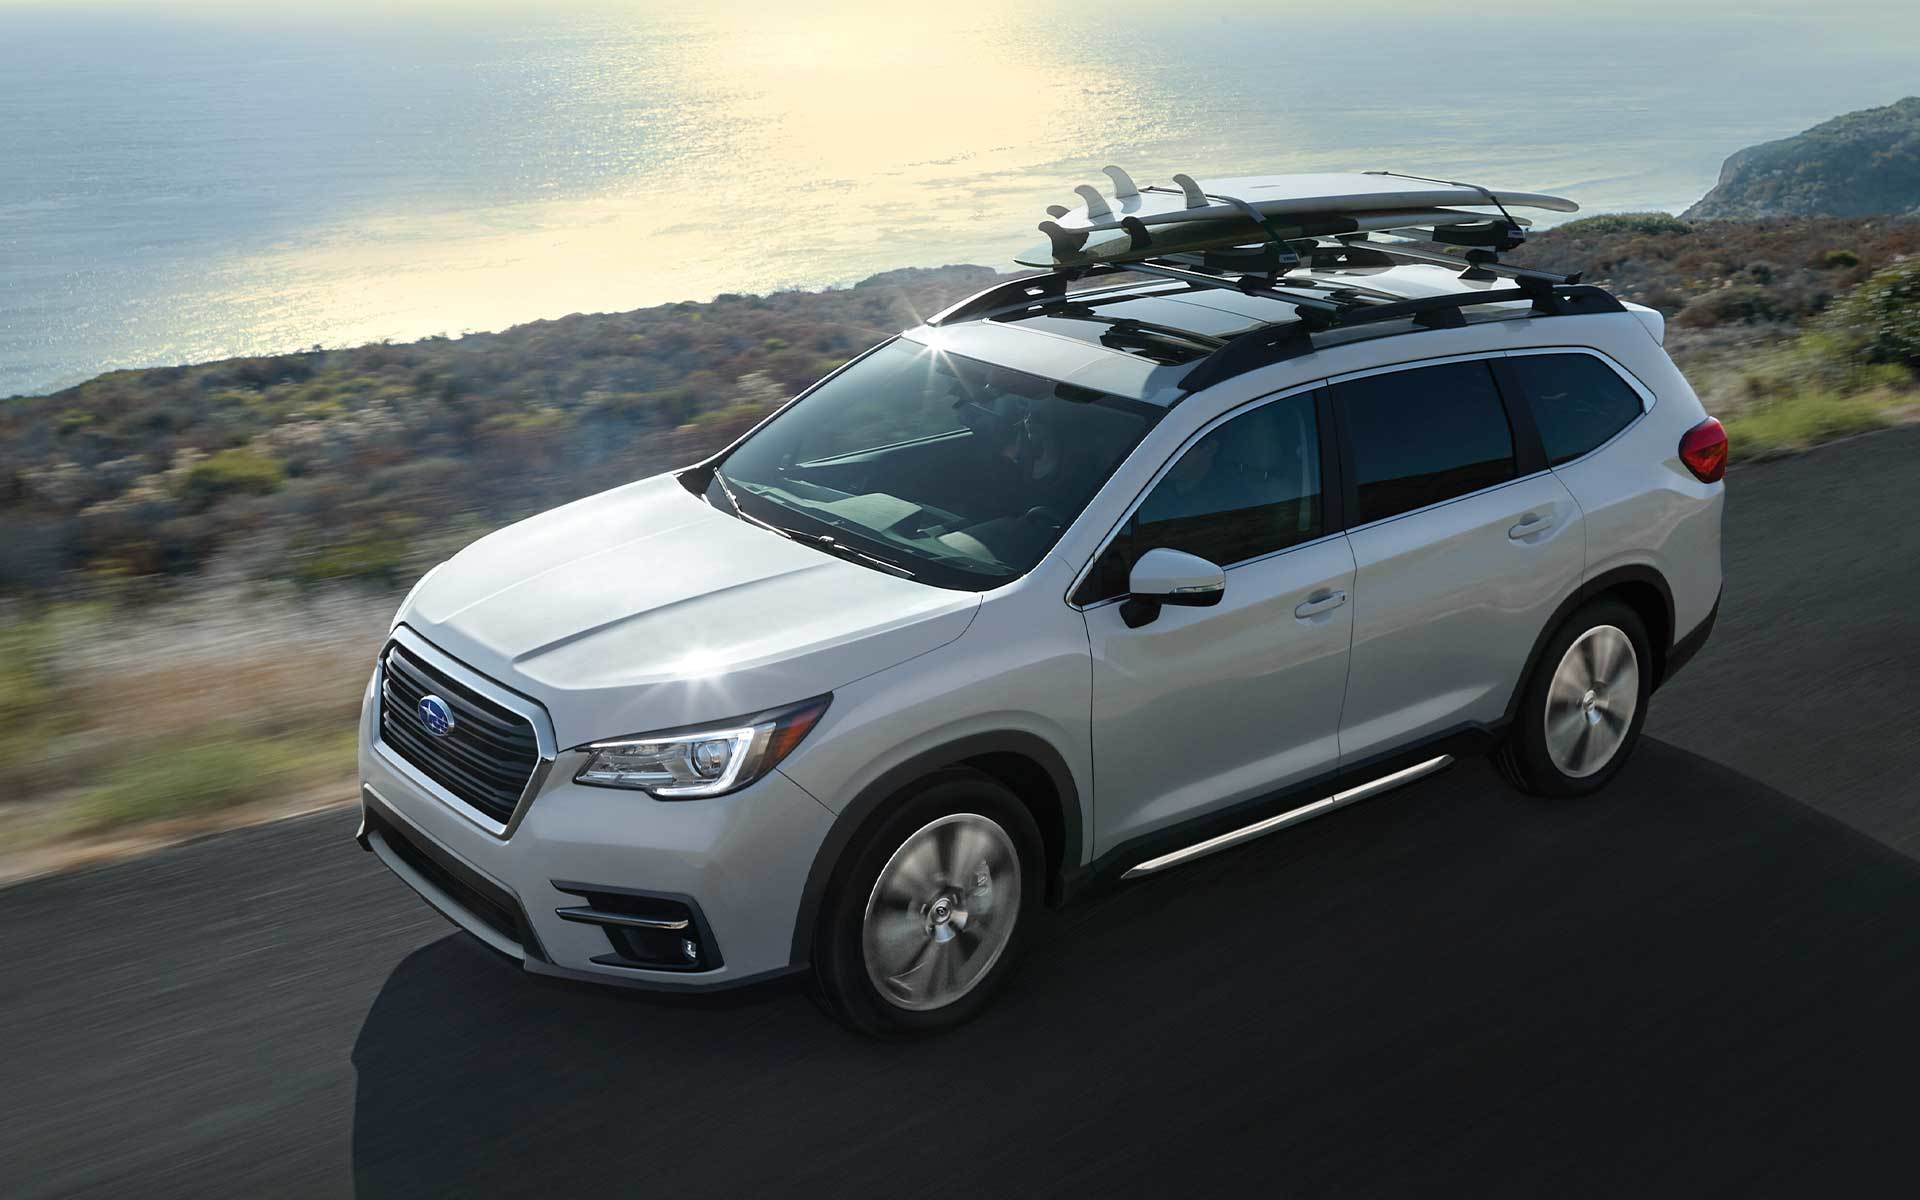 Can the Subaru Ascent Really Tow 5,000 Pounds? TinyHouseDesign